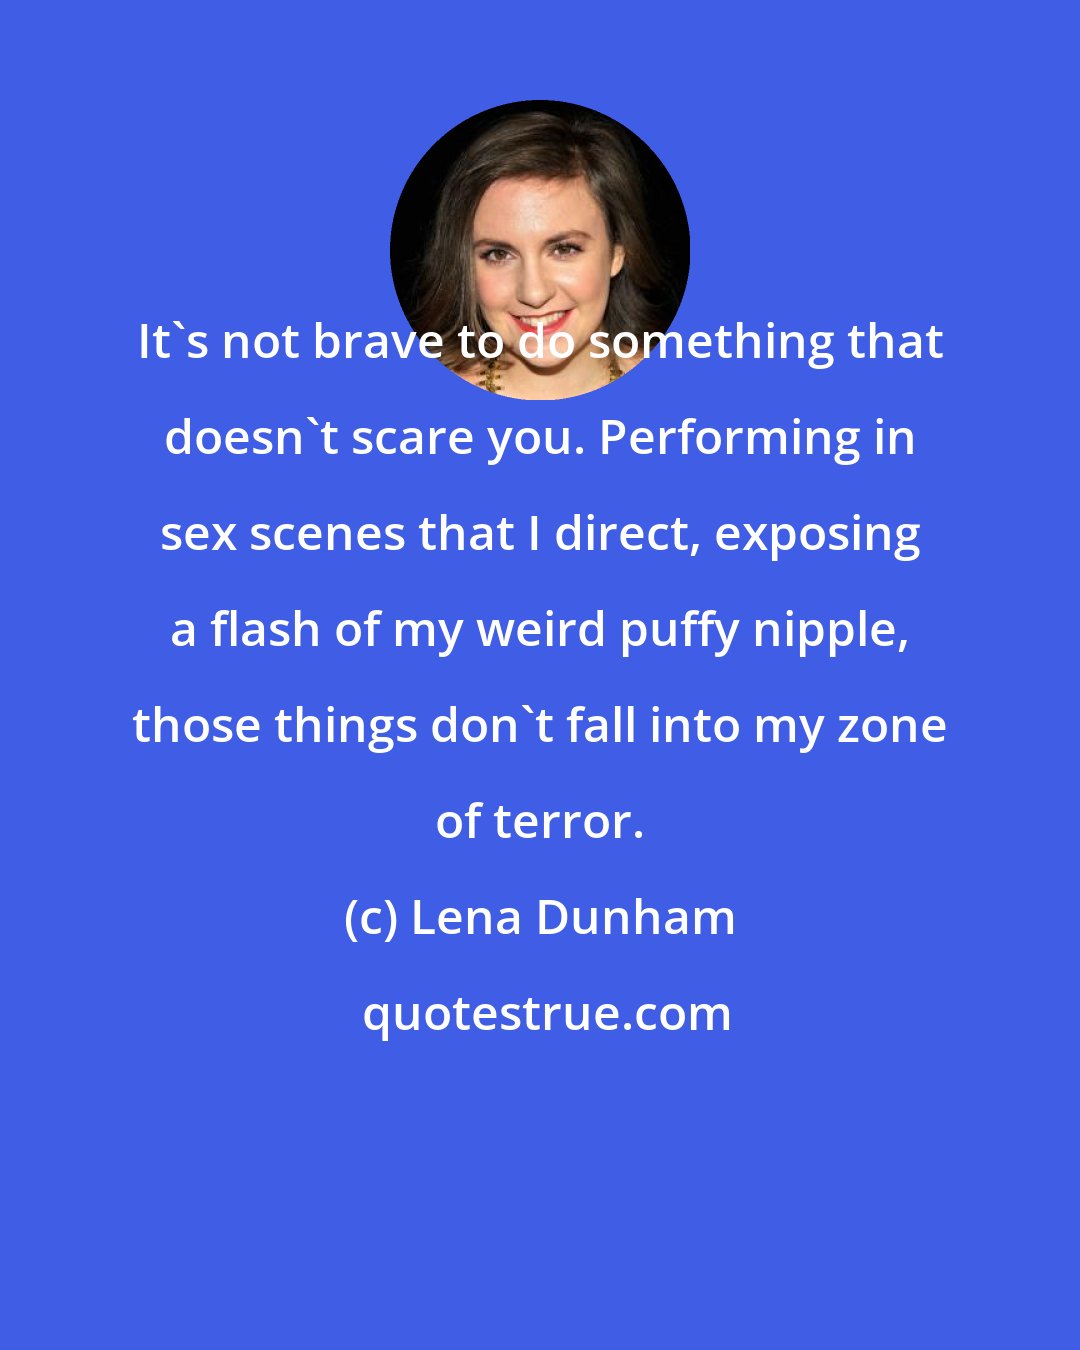 Lena Dunham: It's not brave to do something that doesn't scare you. Performing in sex scenes that I direct, exposing a flash of my weird puffy nipple, those things don't fall into my zone of terror.